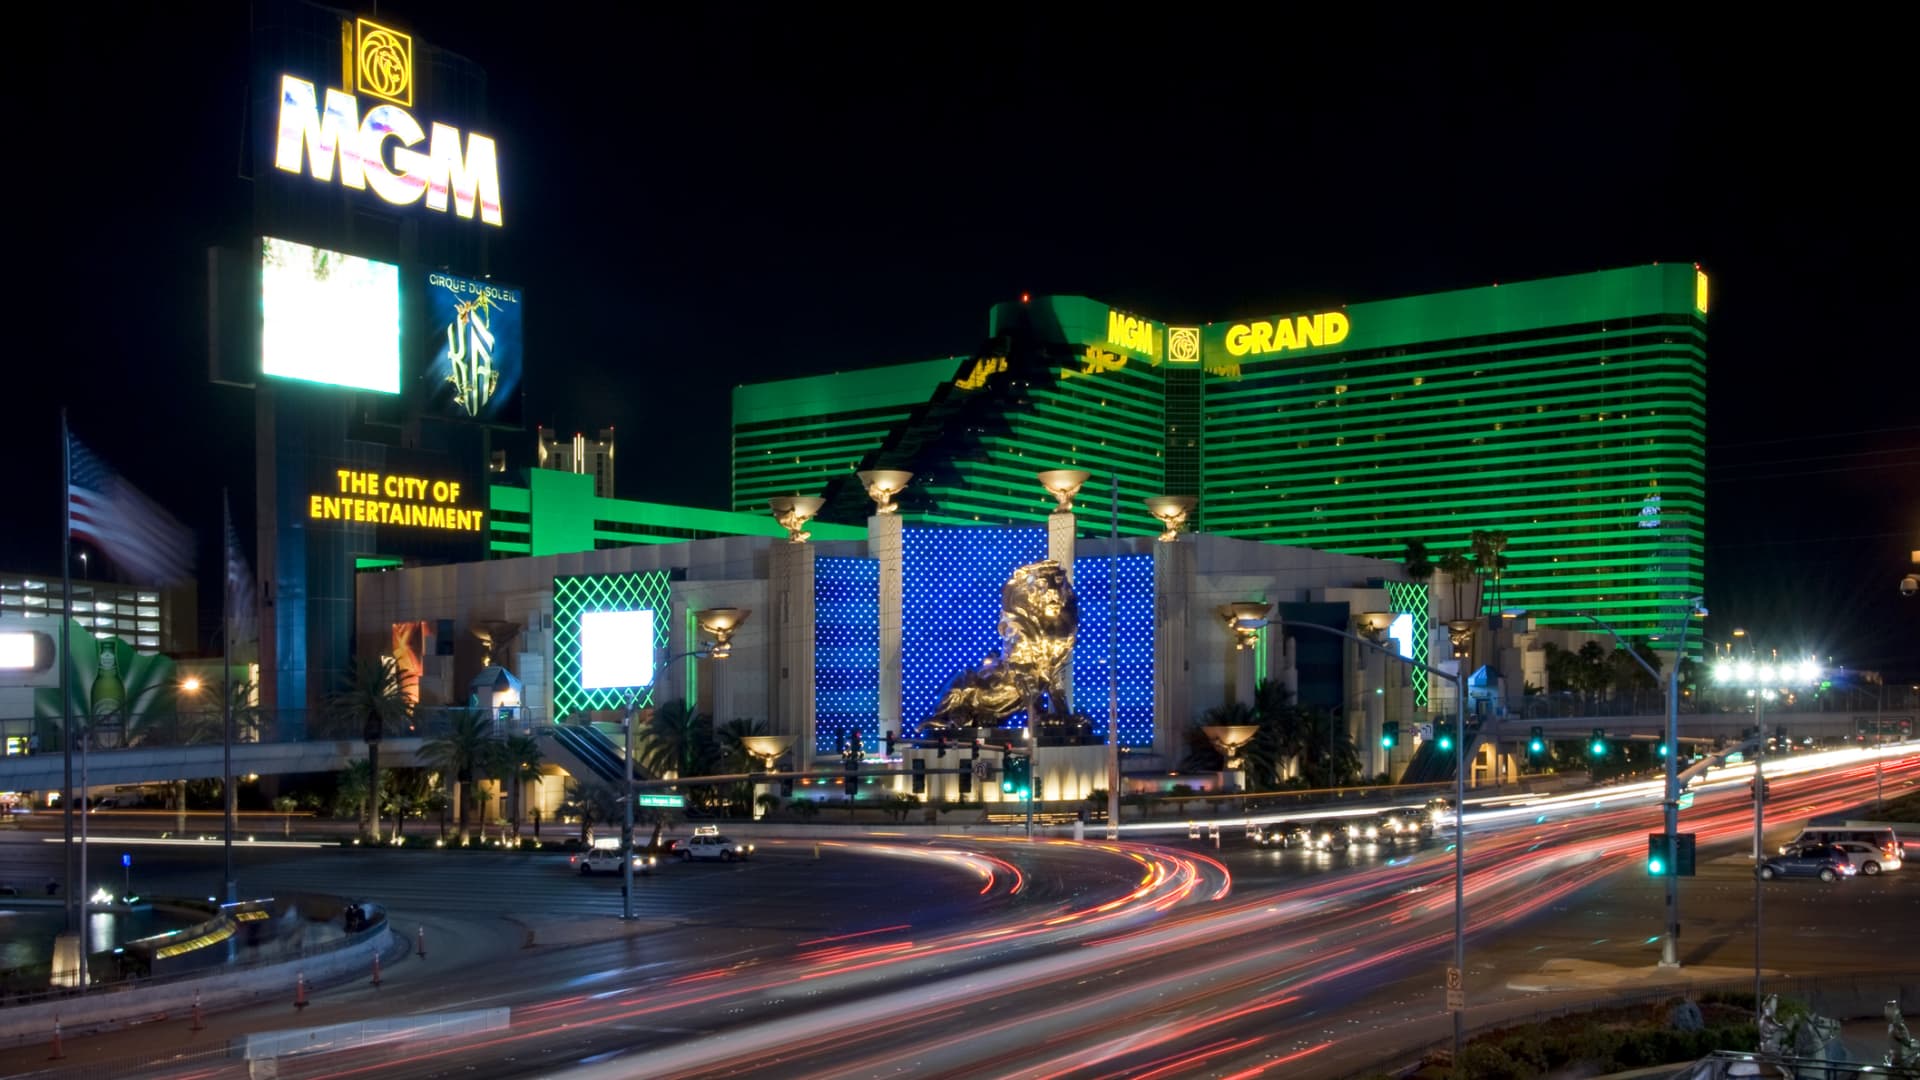 Bally's and MGM Resorts Hedge Funds Adjust Positions